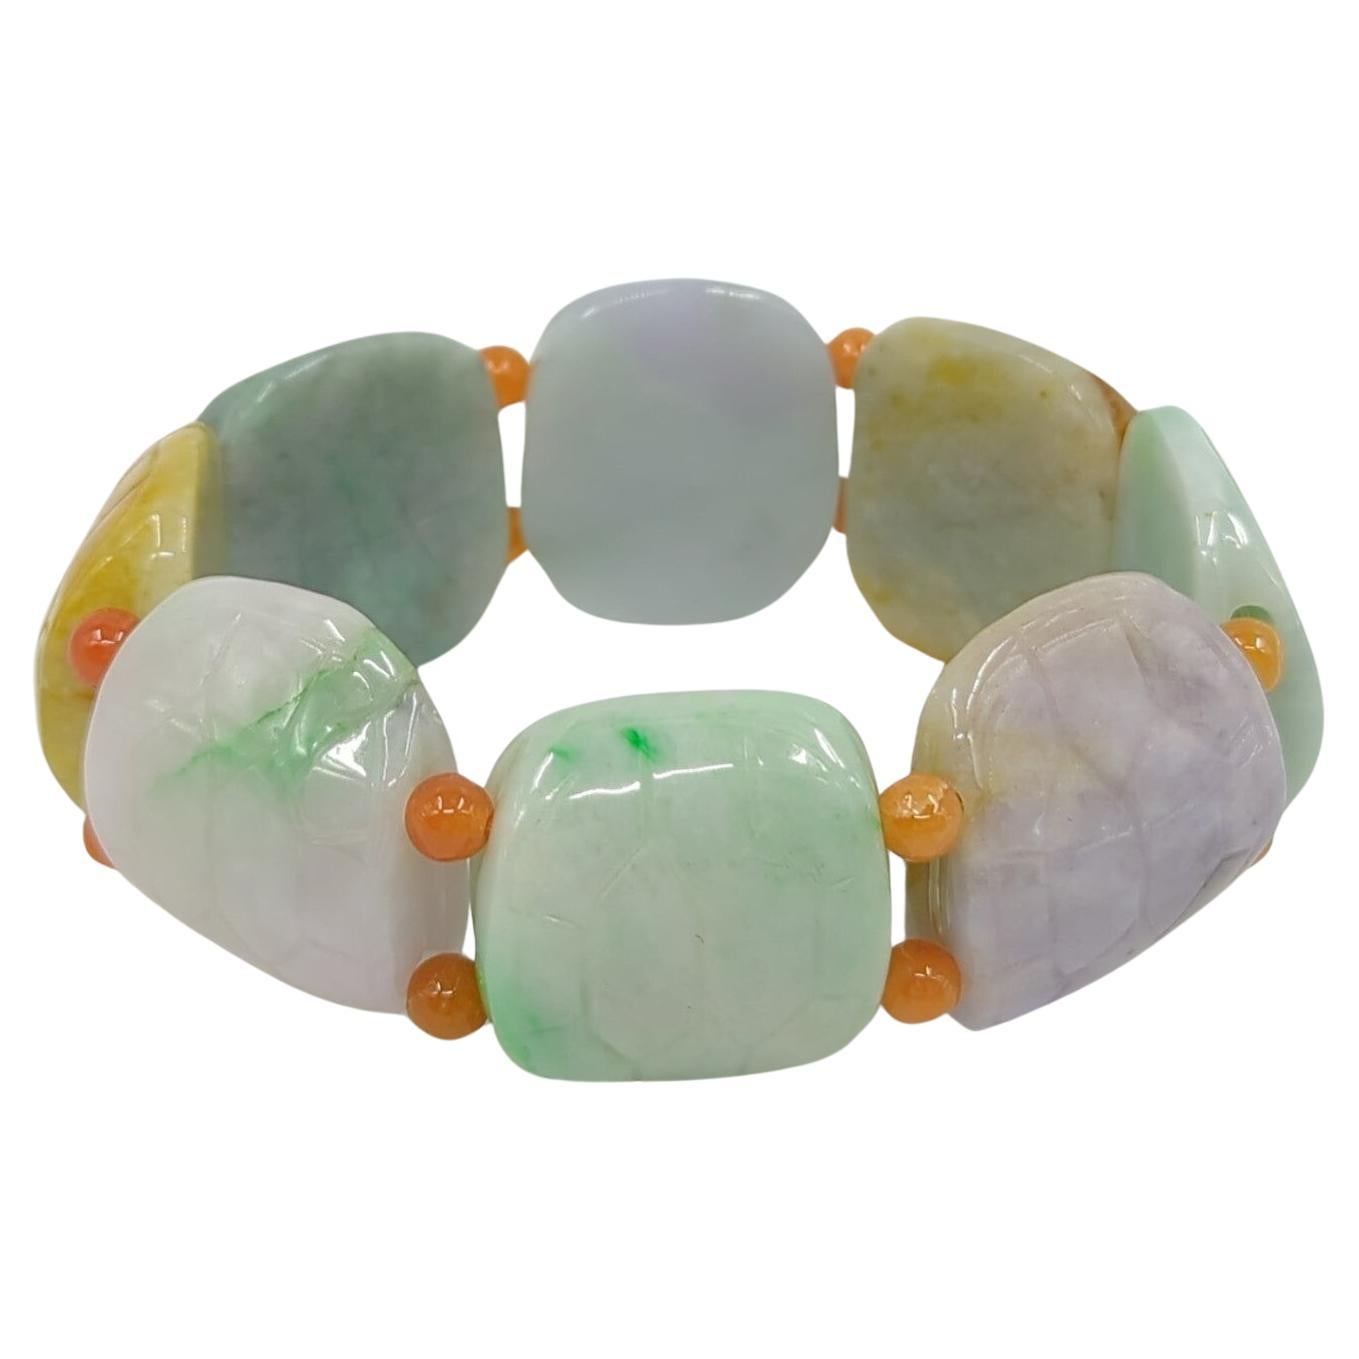 Vintage Chinese hand carved jadeite bracelet in the form of eight multi colored, carved turtle shells, each connected by two intense orange jadeite beads to form a hefty and flexible bracelet (strung with elastic cord), of 10